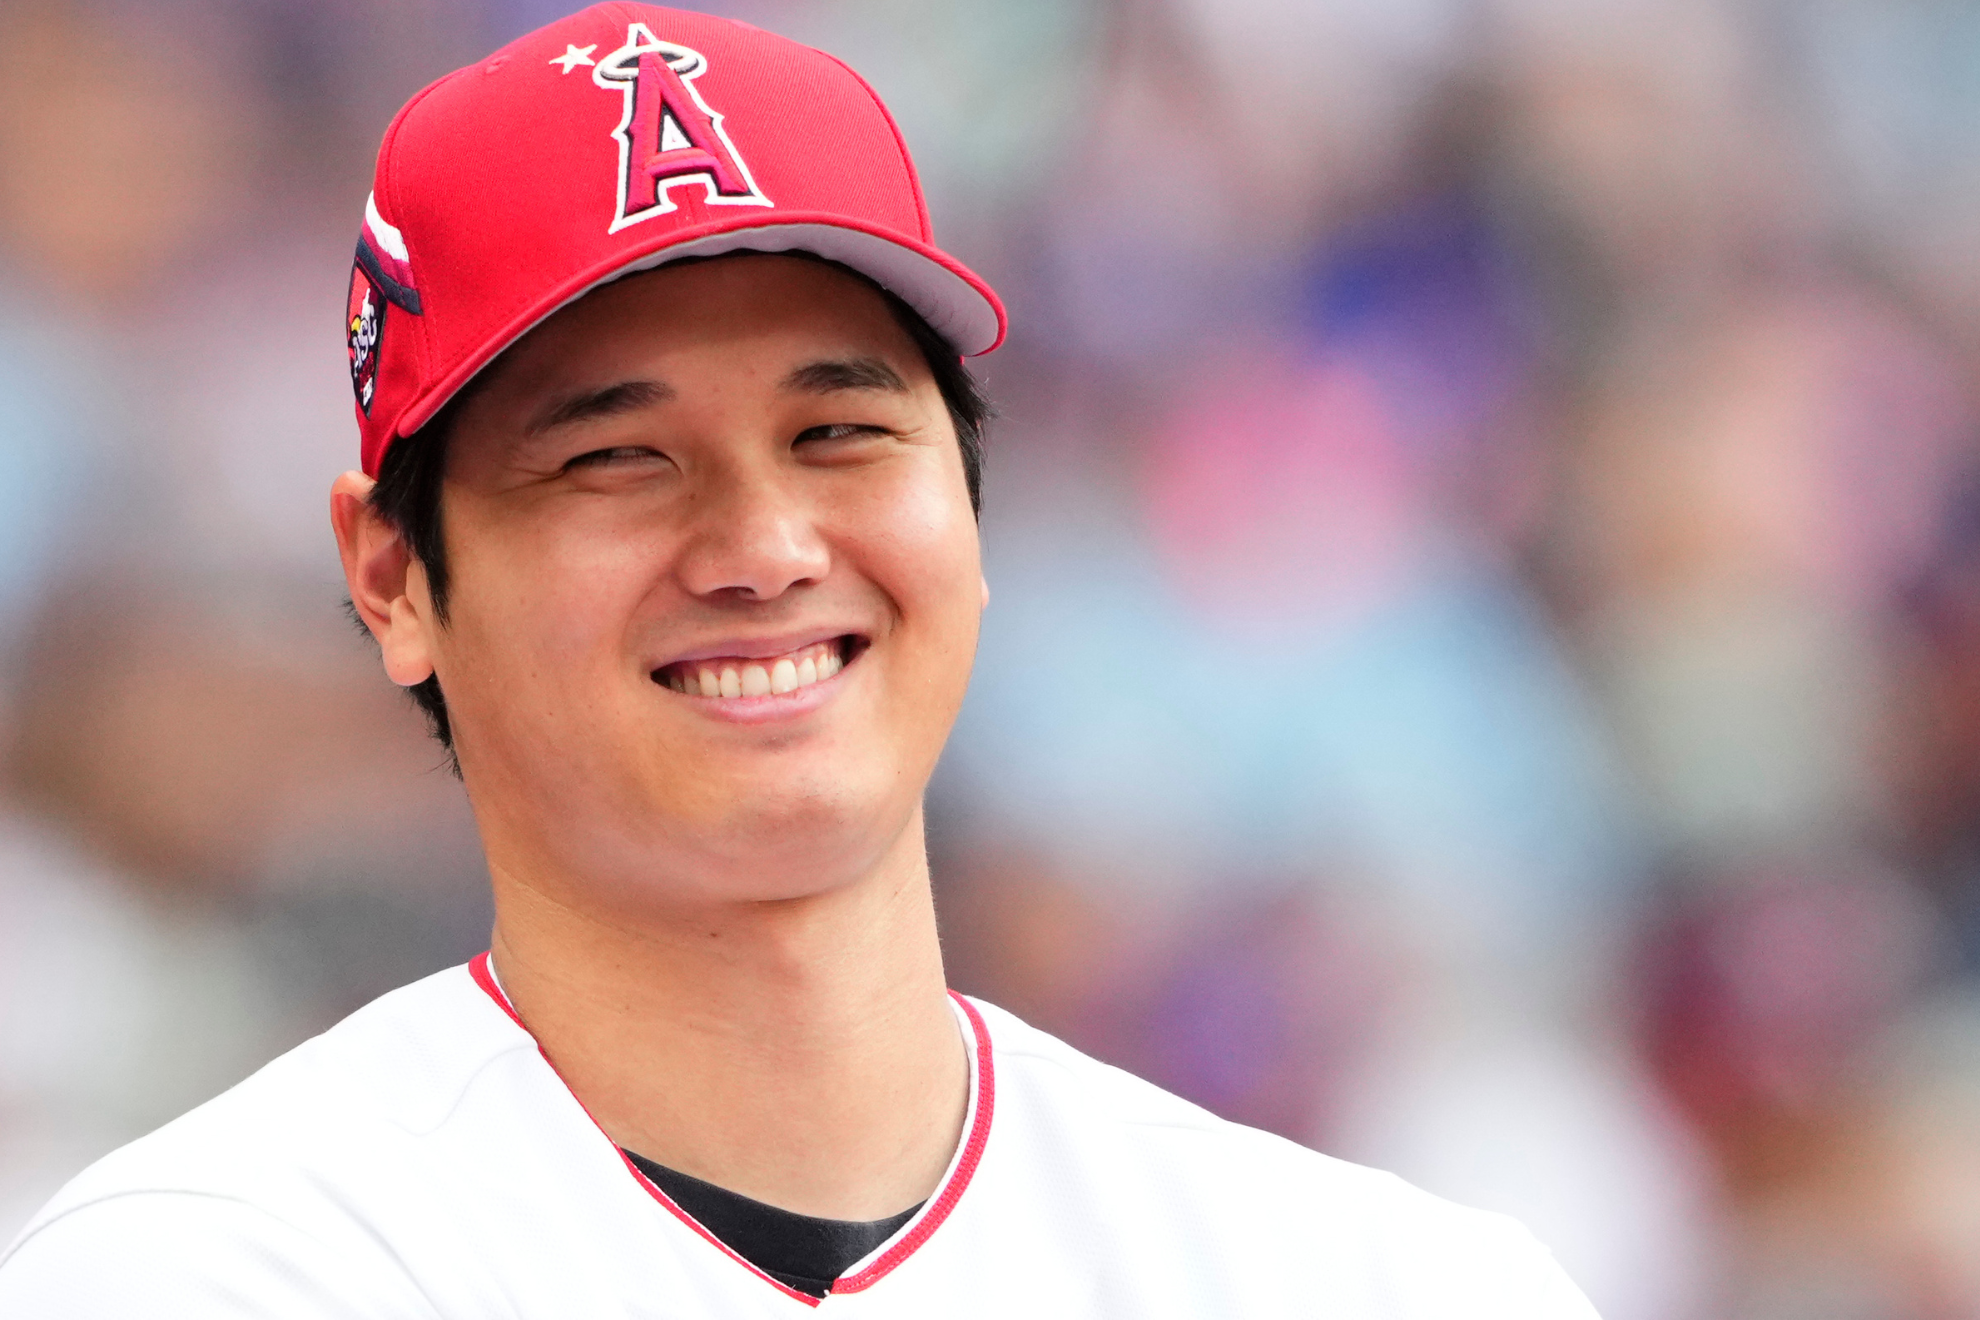 Ohtani hit 44 home runs at the plate and recorded a 3.14 ERA on the mound.